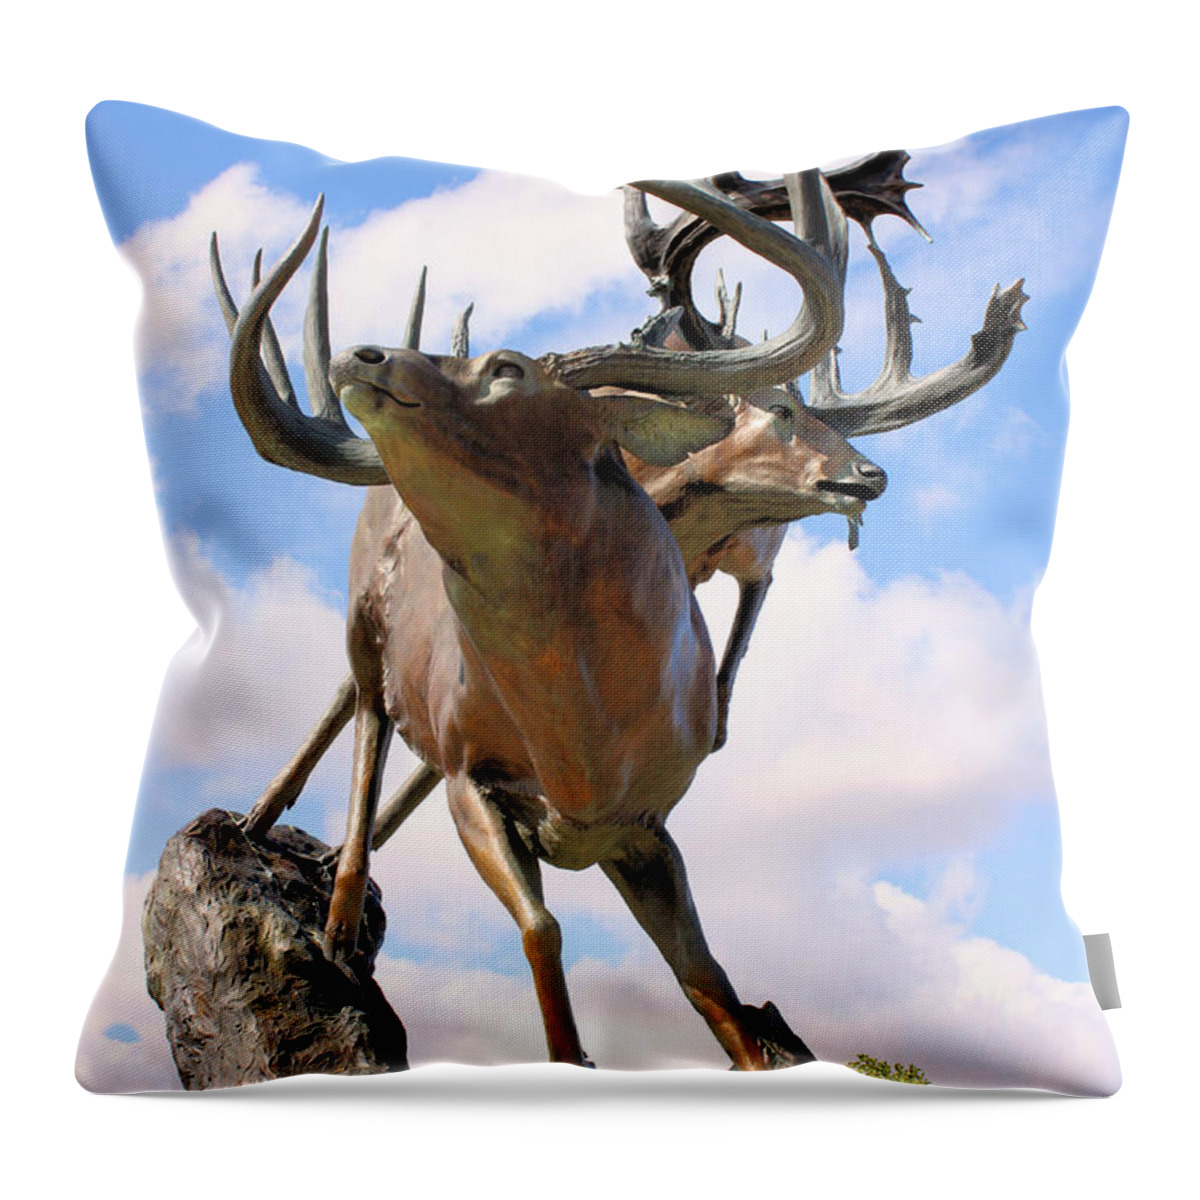 Statue Throw Pillow featuring the photograph On Top of the World by Kristin Elmquist